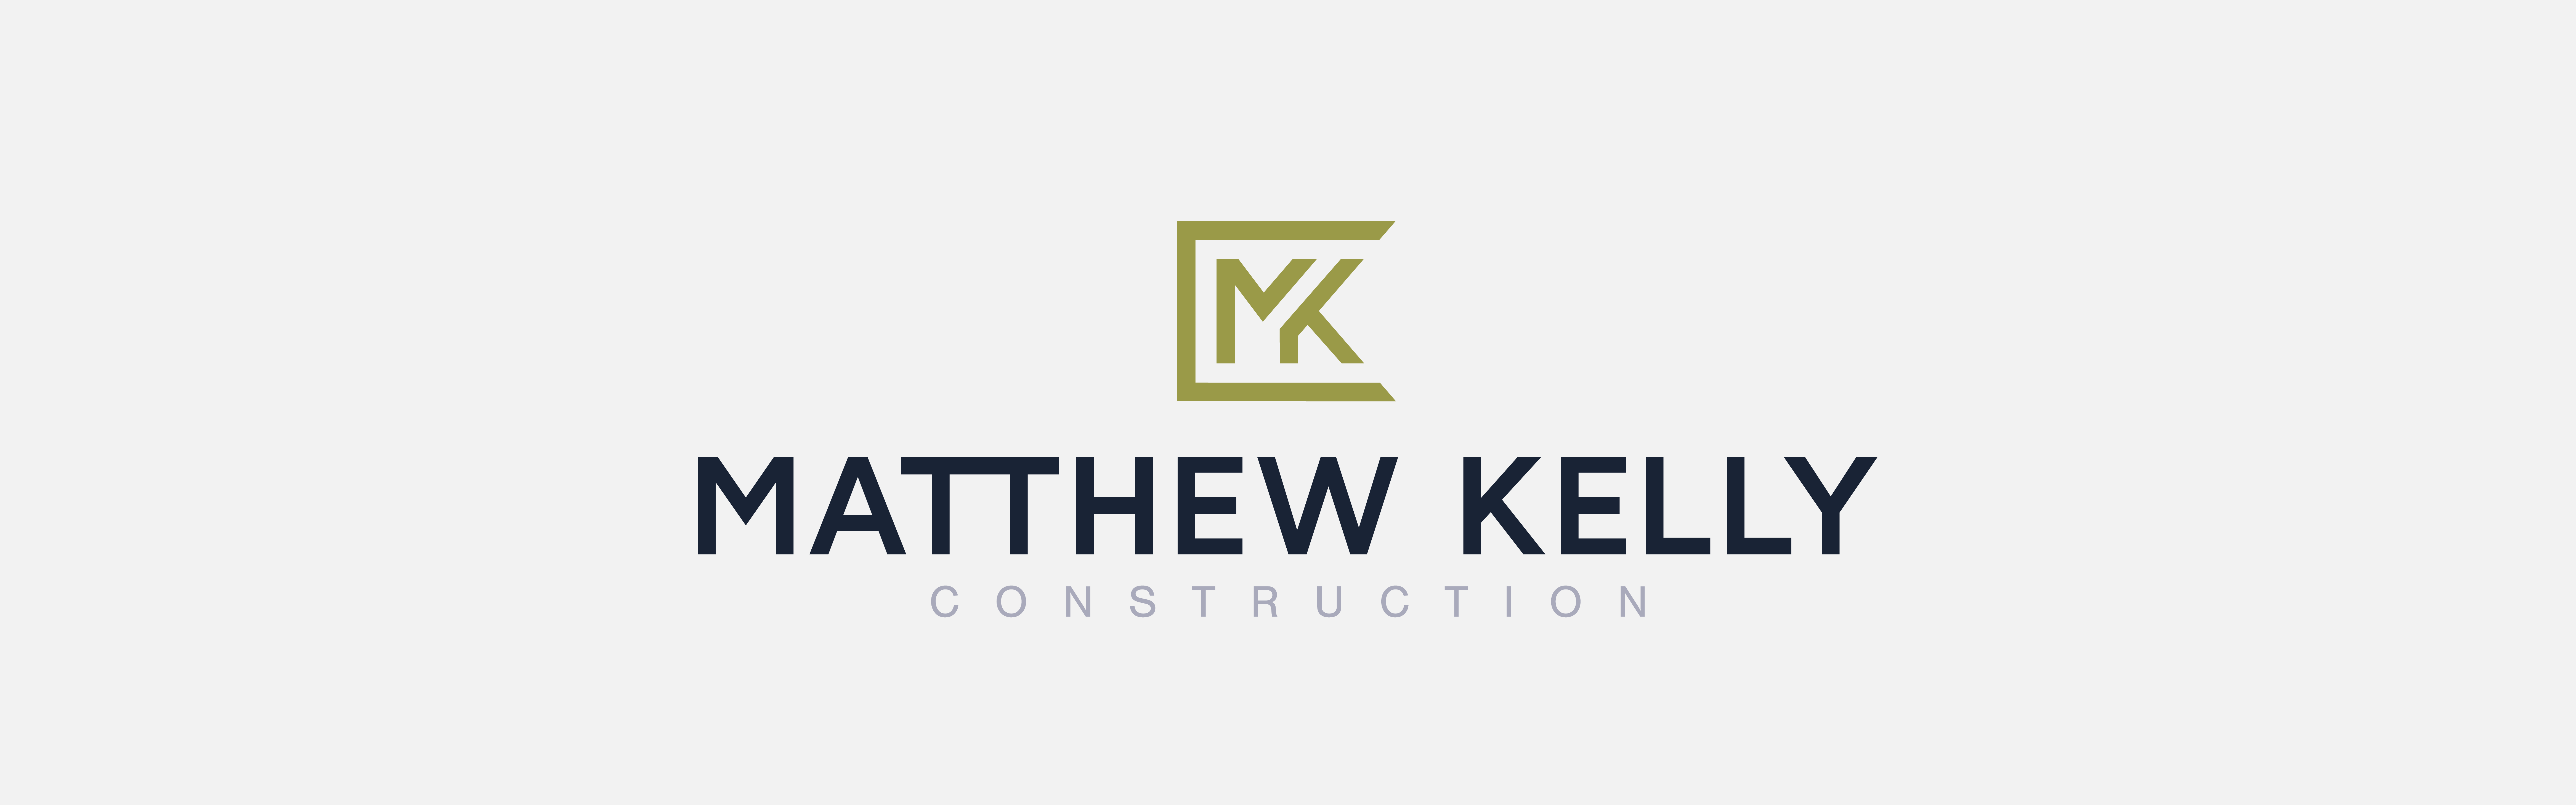 A logo design for "Matthew Kelly Construction" featuring a stylized letter "K" integrated into a geometric shape to the left of the company name.